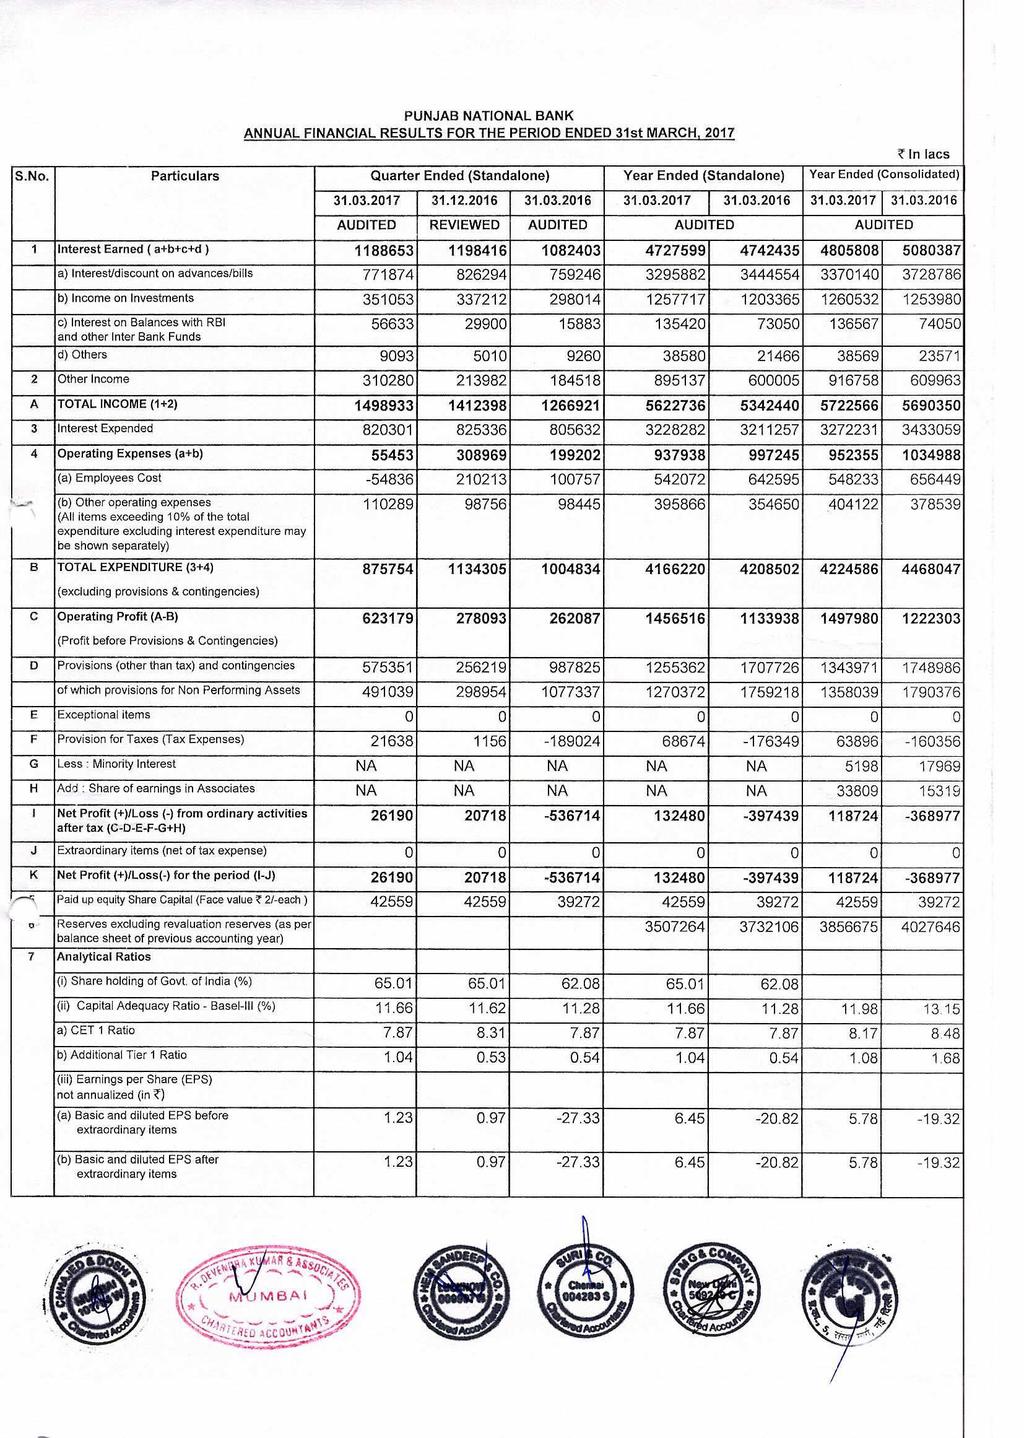 PUNJAB NATIONAL BANK ANNUAL FINANCIAL RESULTS FOR THE PERIOD ENDED 31st MARCH, 2017 S.No. Particulars Quarter Ended (Standalone) Year Ended (Standalone) Year Ended (Consolidated) In lees 31.03.